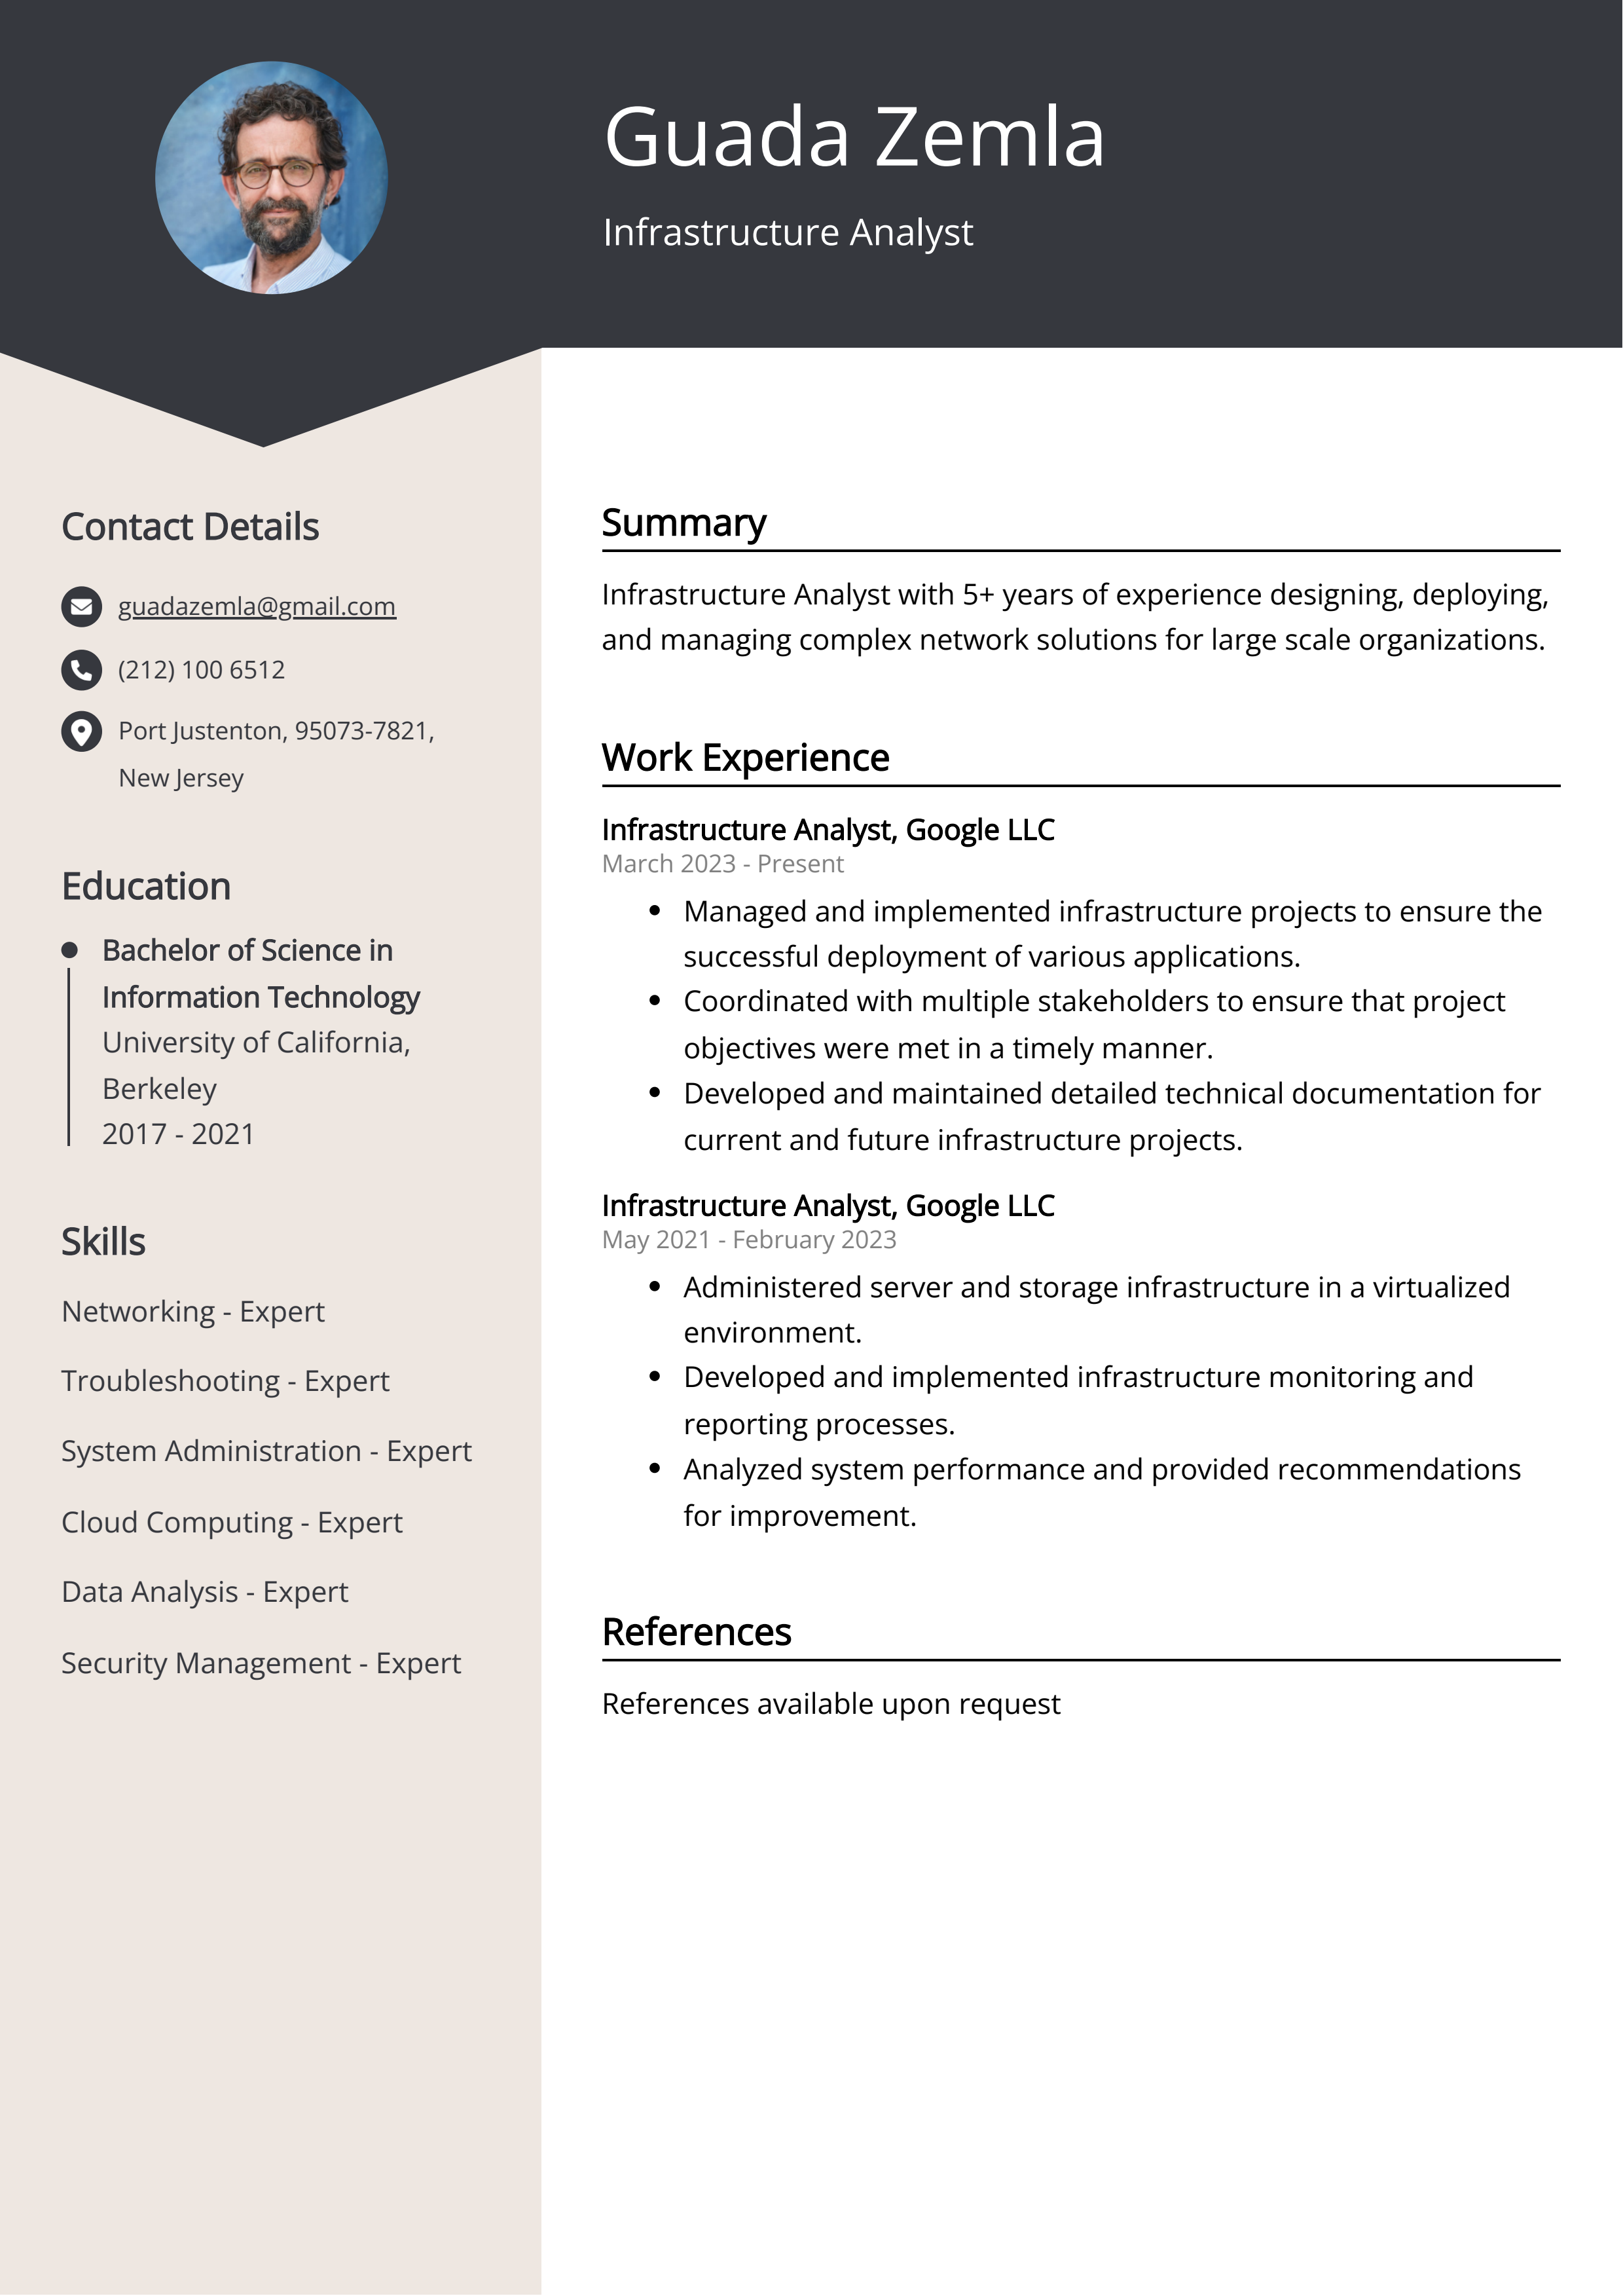 Infrastructure Analyst CV Example